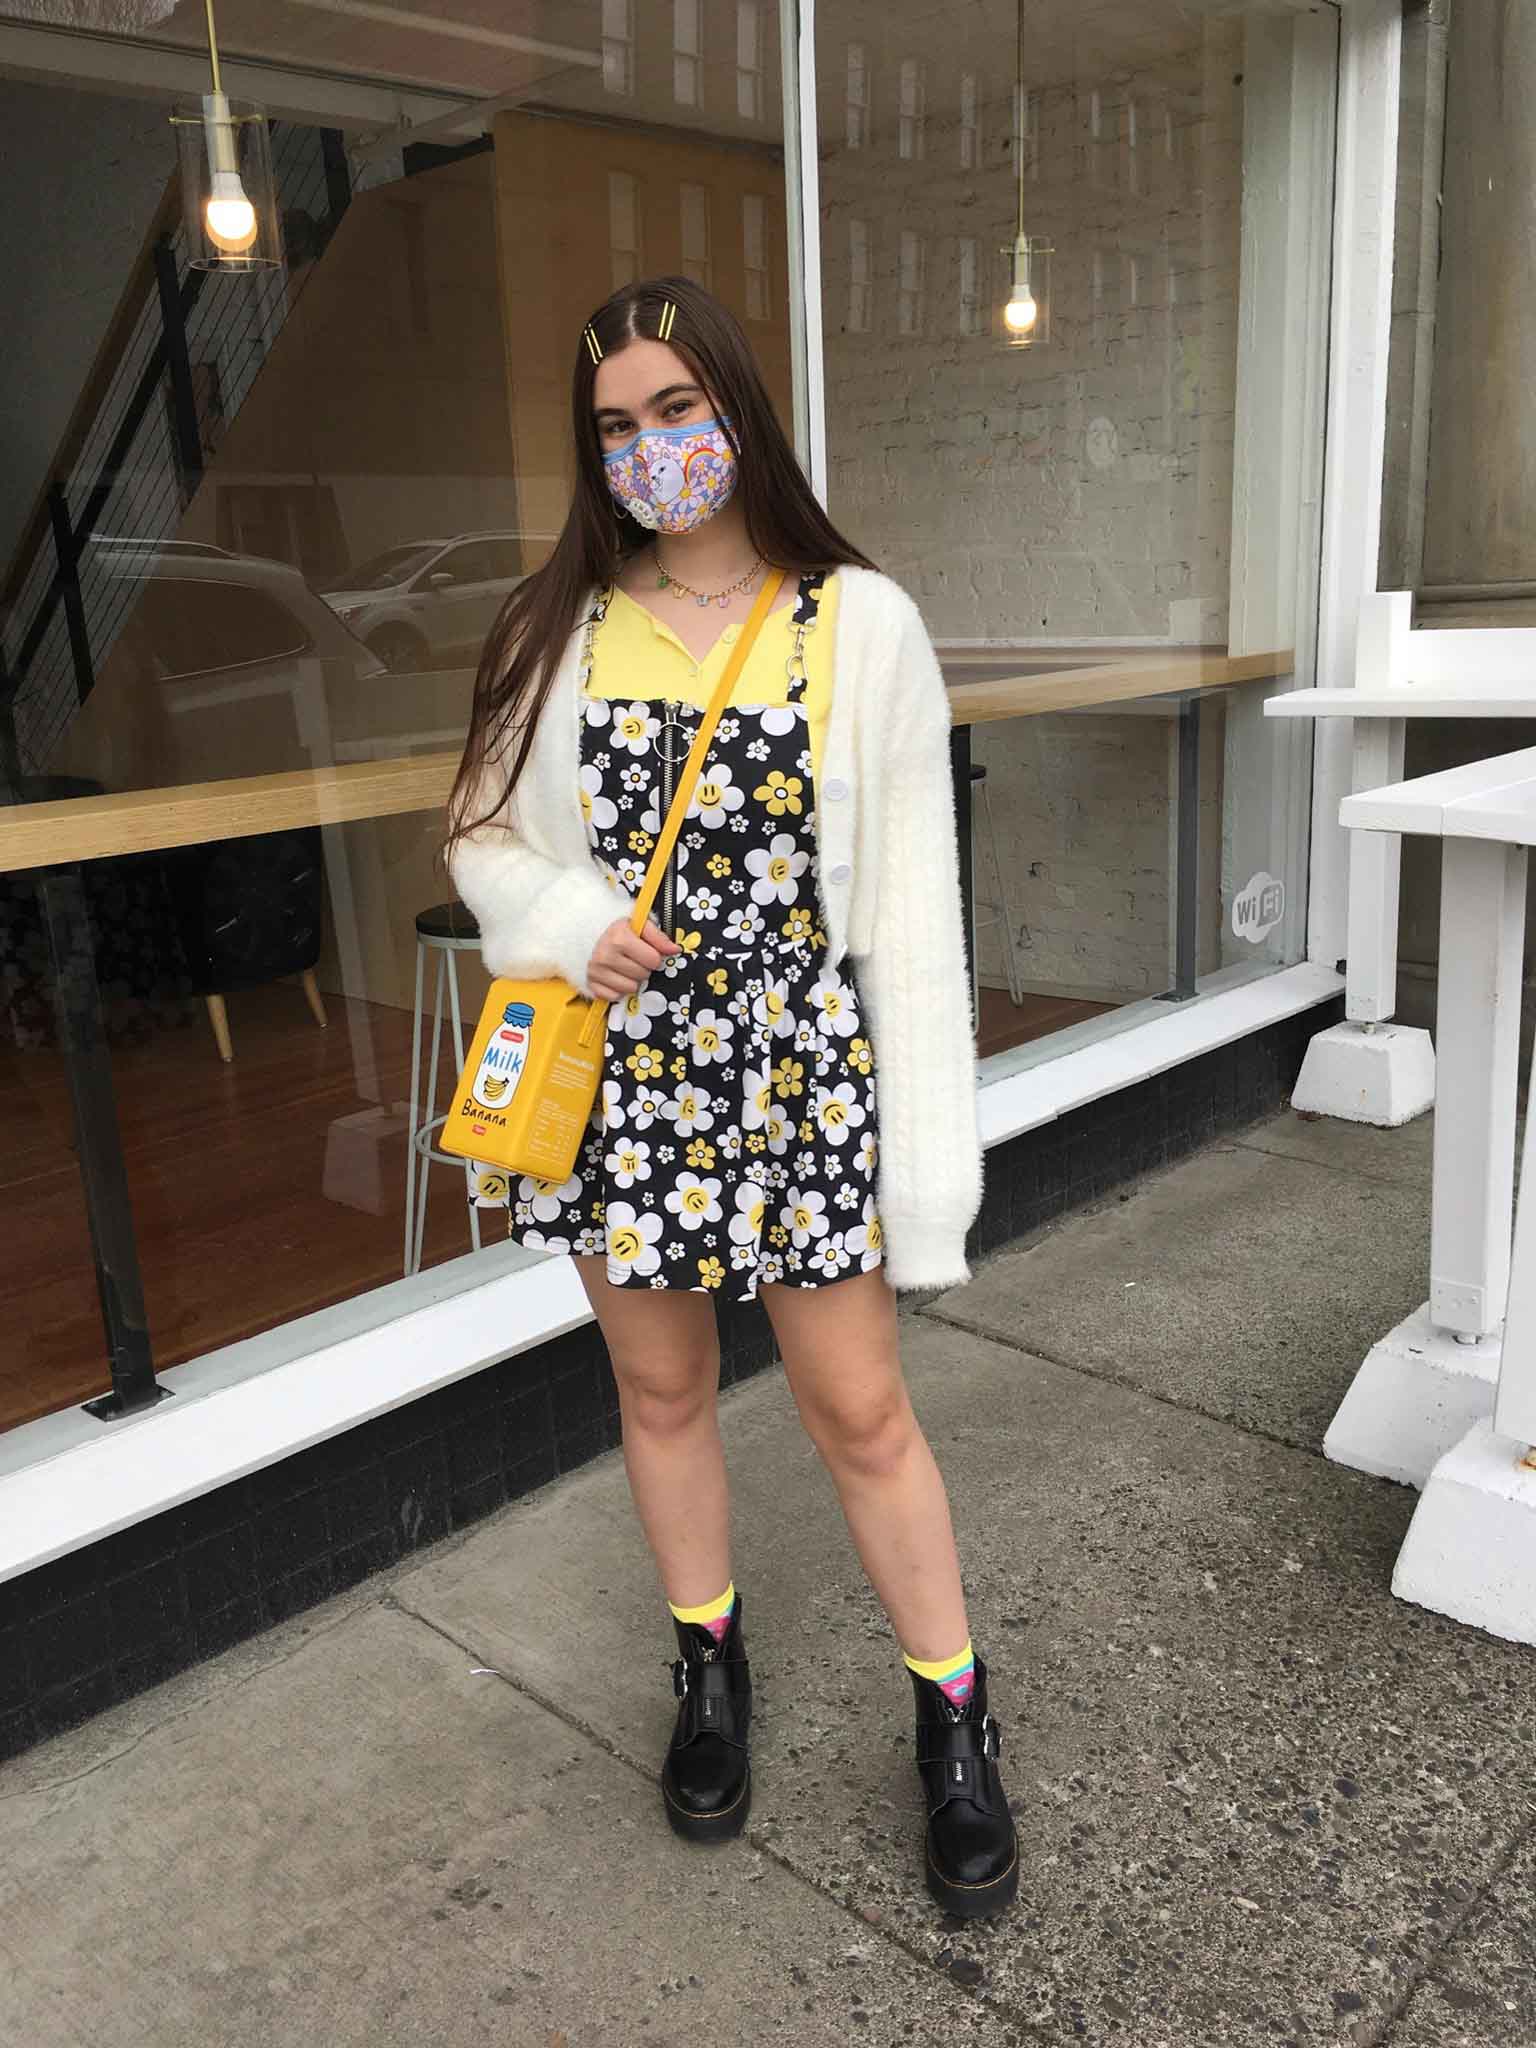 Person standing outside wearing large-print floral dress layered over yellow t-shirt, topped with cream cropped cardigan and black lace-up boots. Her novelty handbag is designed to look like milk carton.